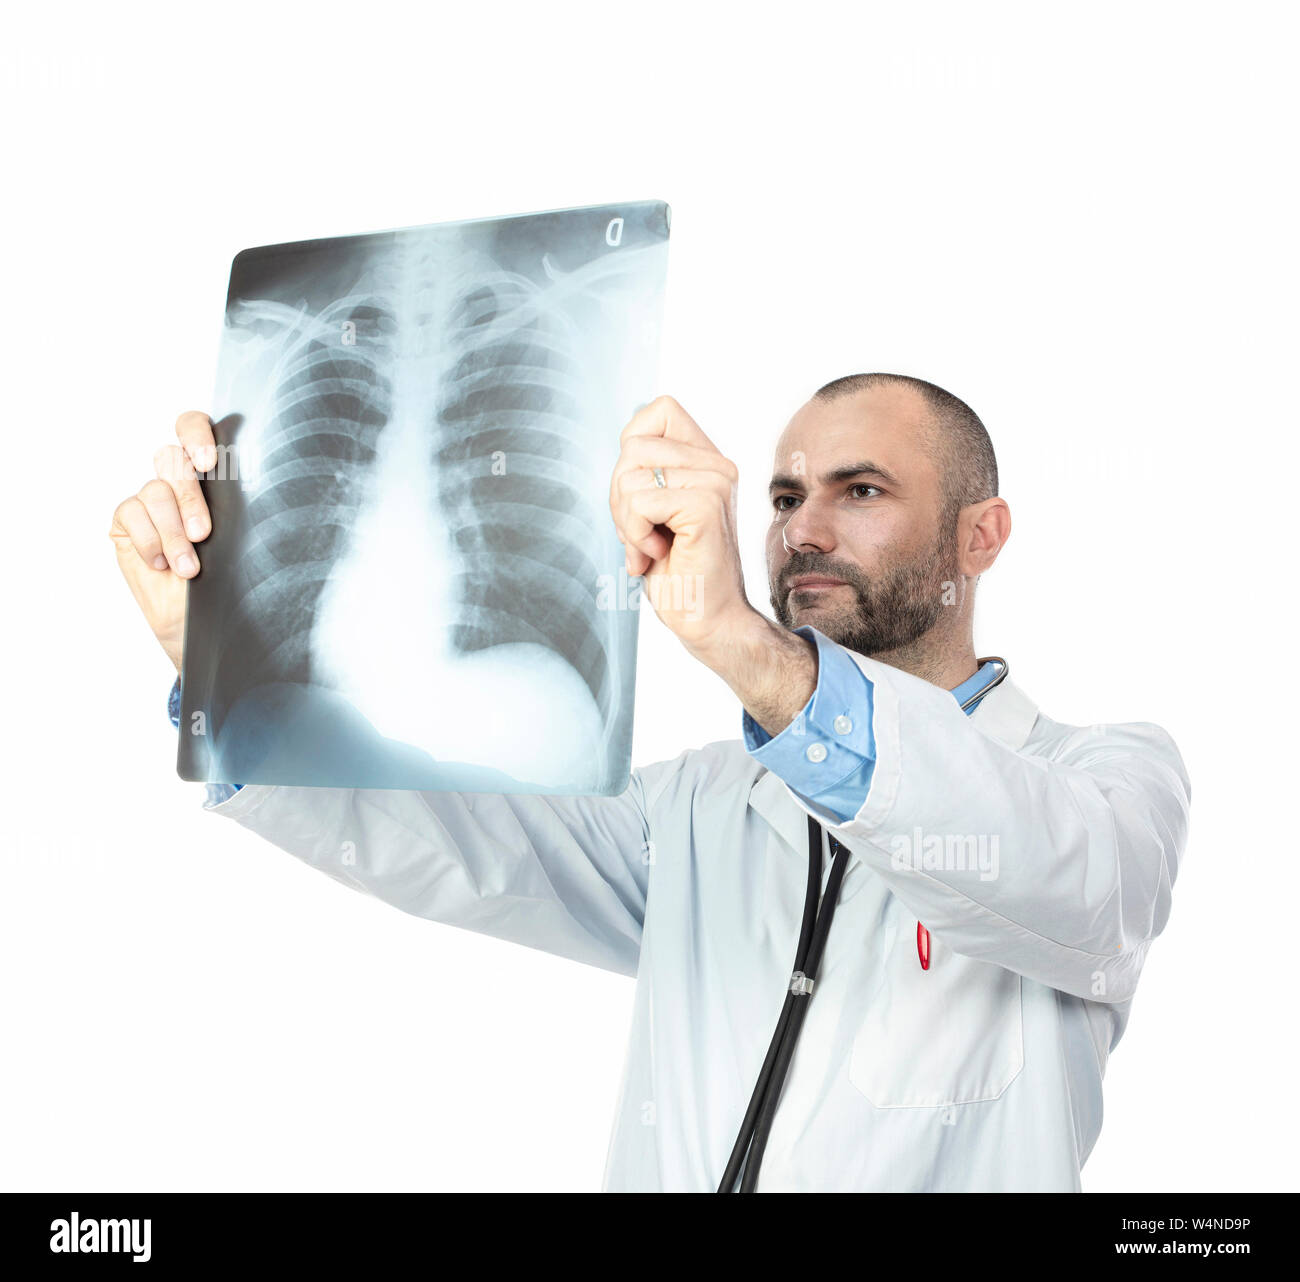 doctor with beard and gown examines a chest x-ray isolated on white. Stock Photo